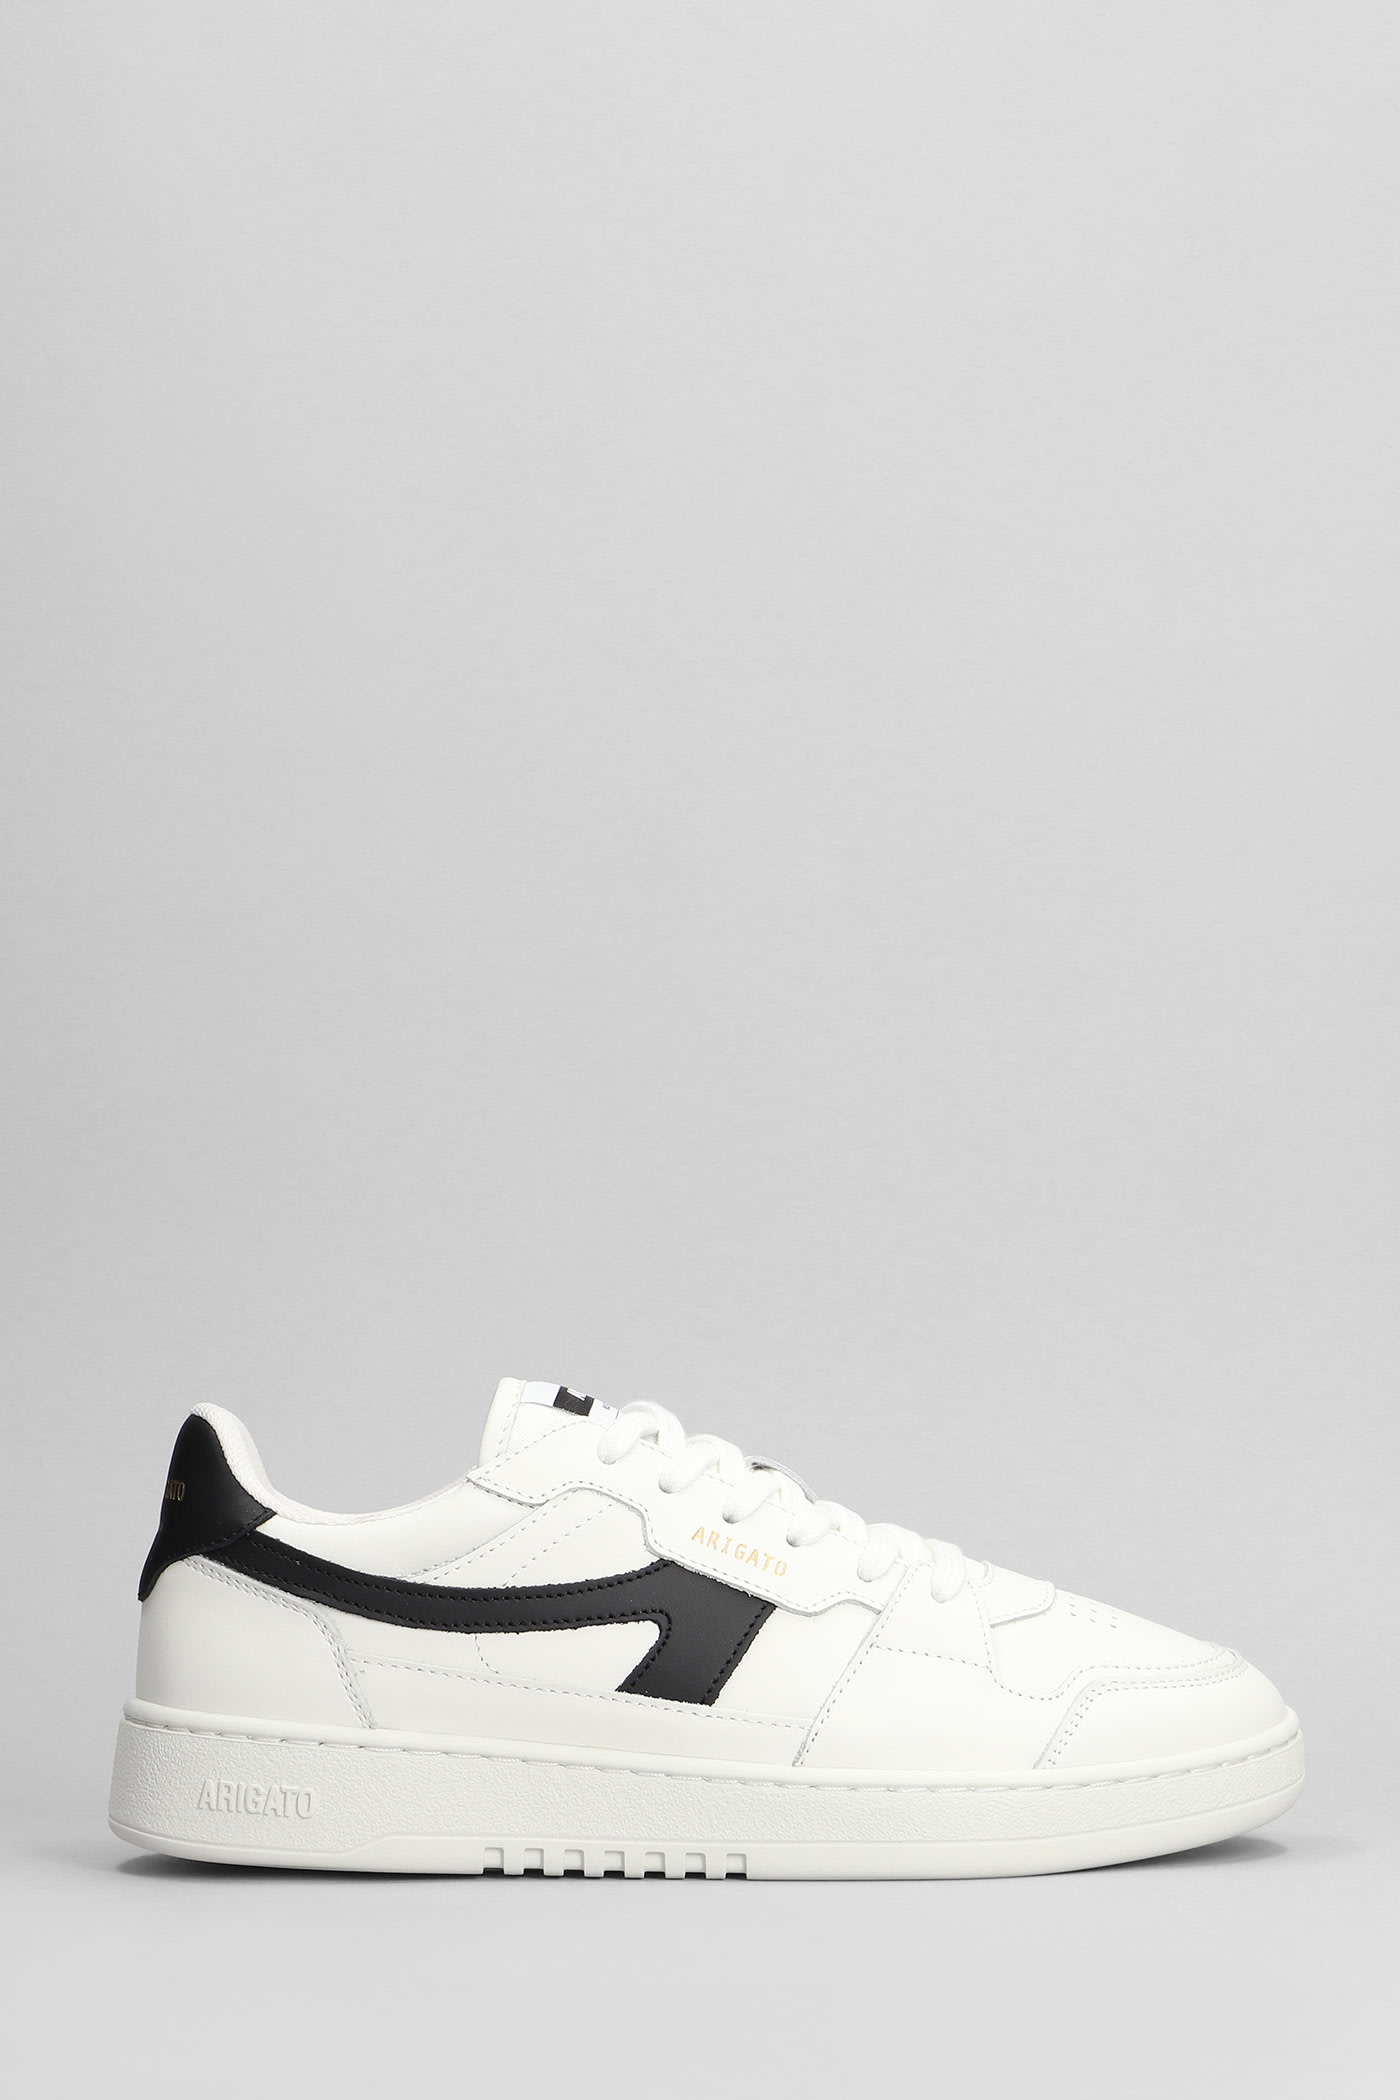 Dice-a Sneaker Sneakers In White Leather